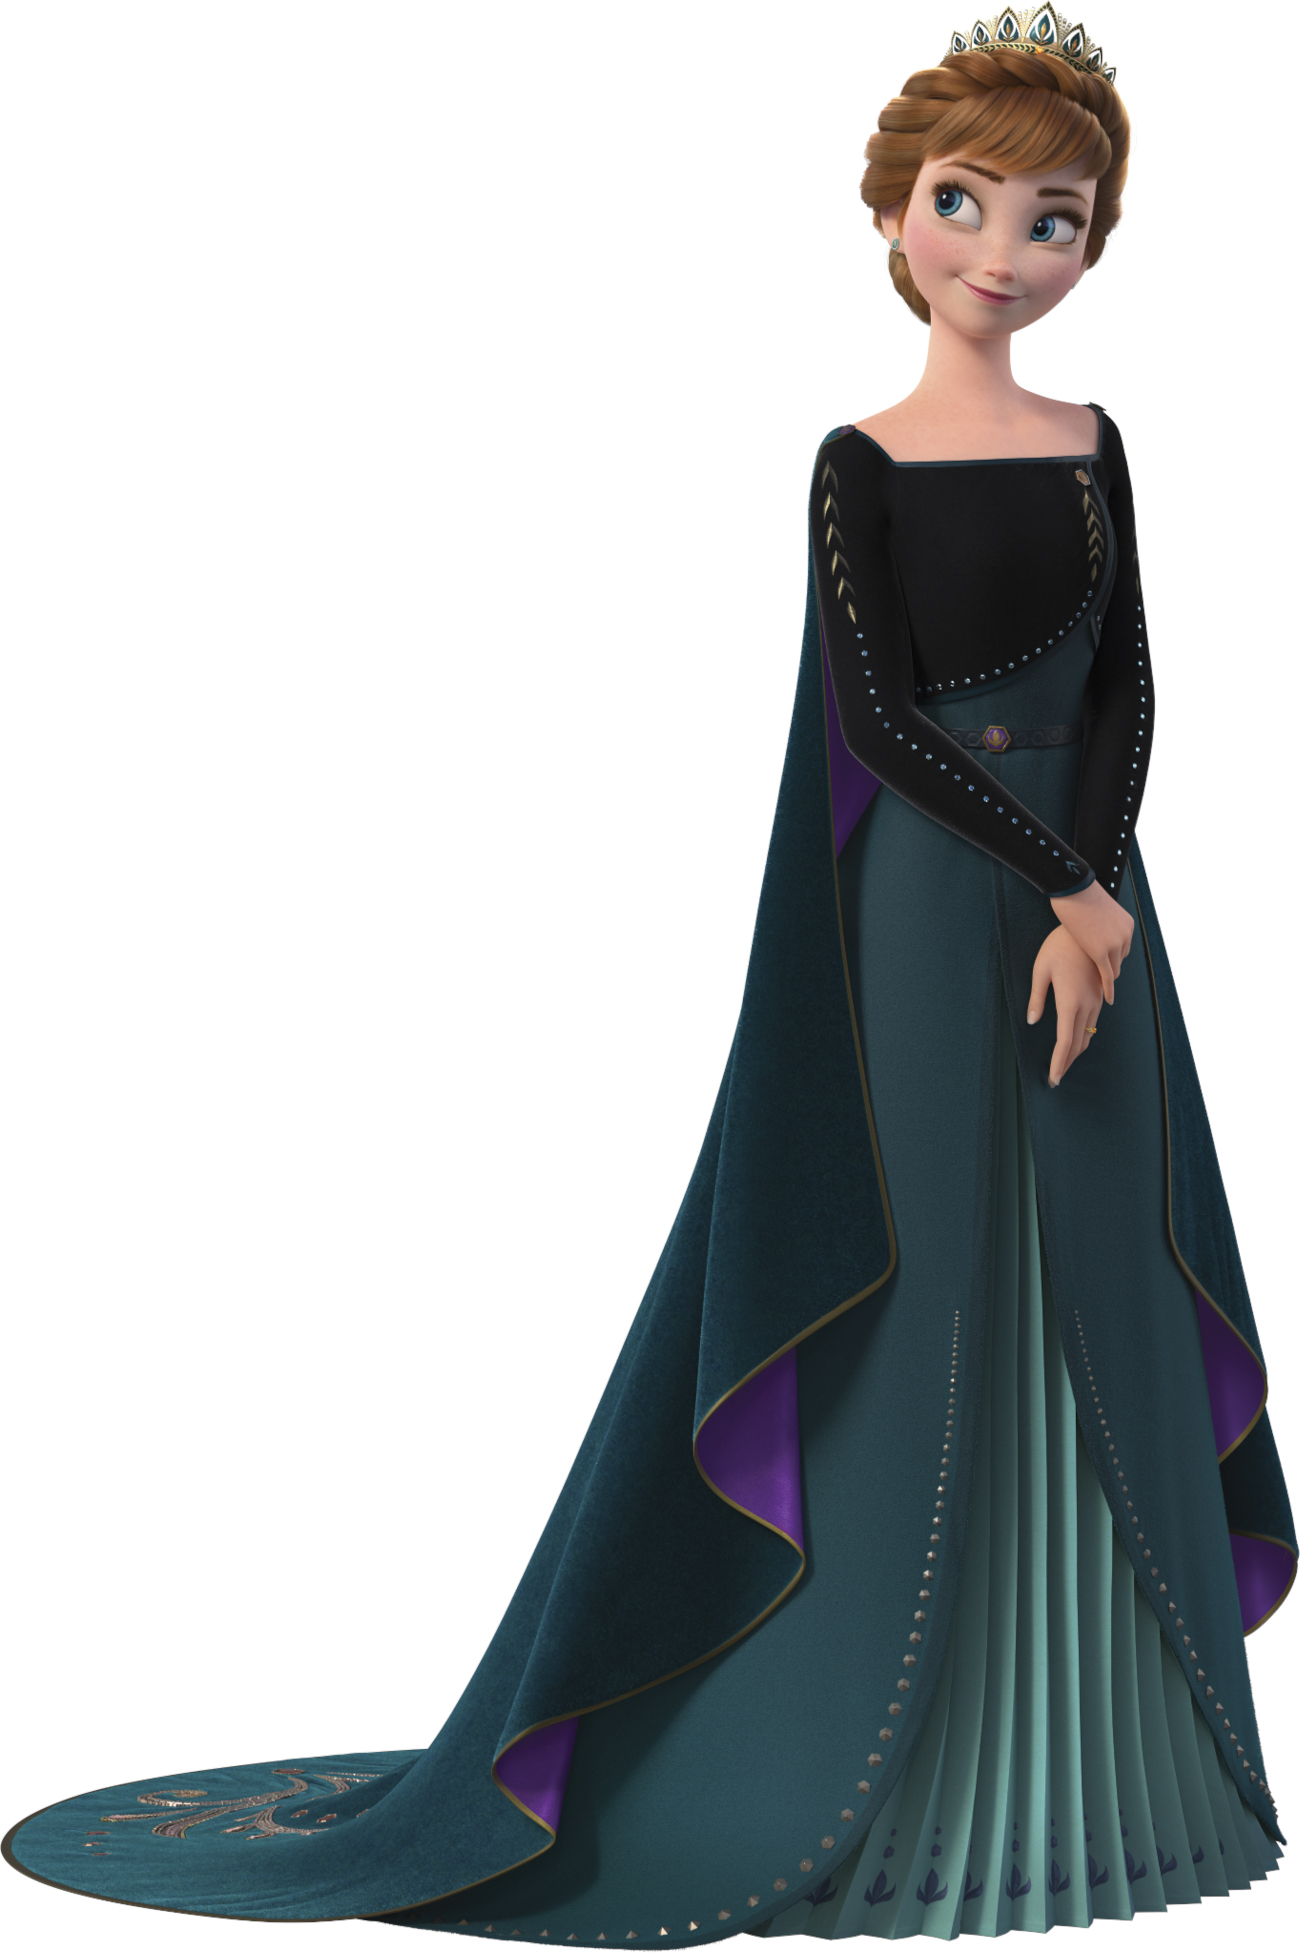 ashish chitale recommends Images Of Anna From Frozen 2